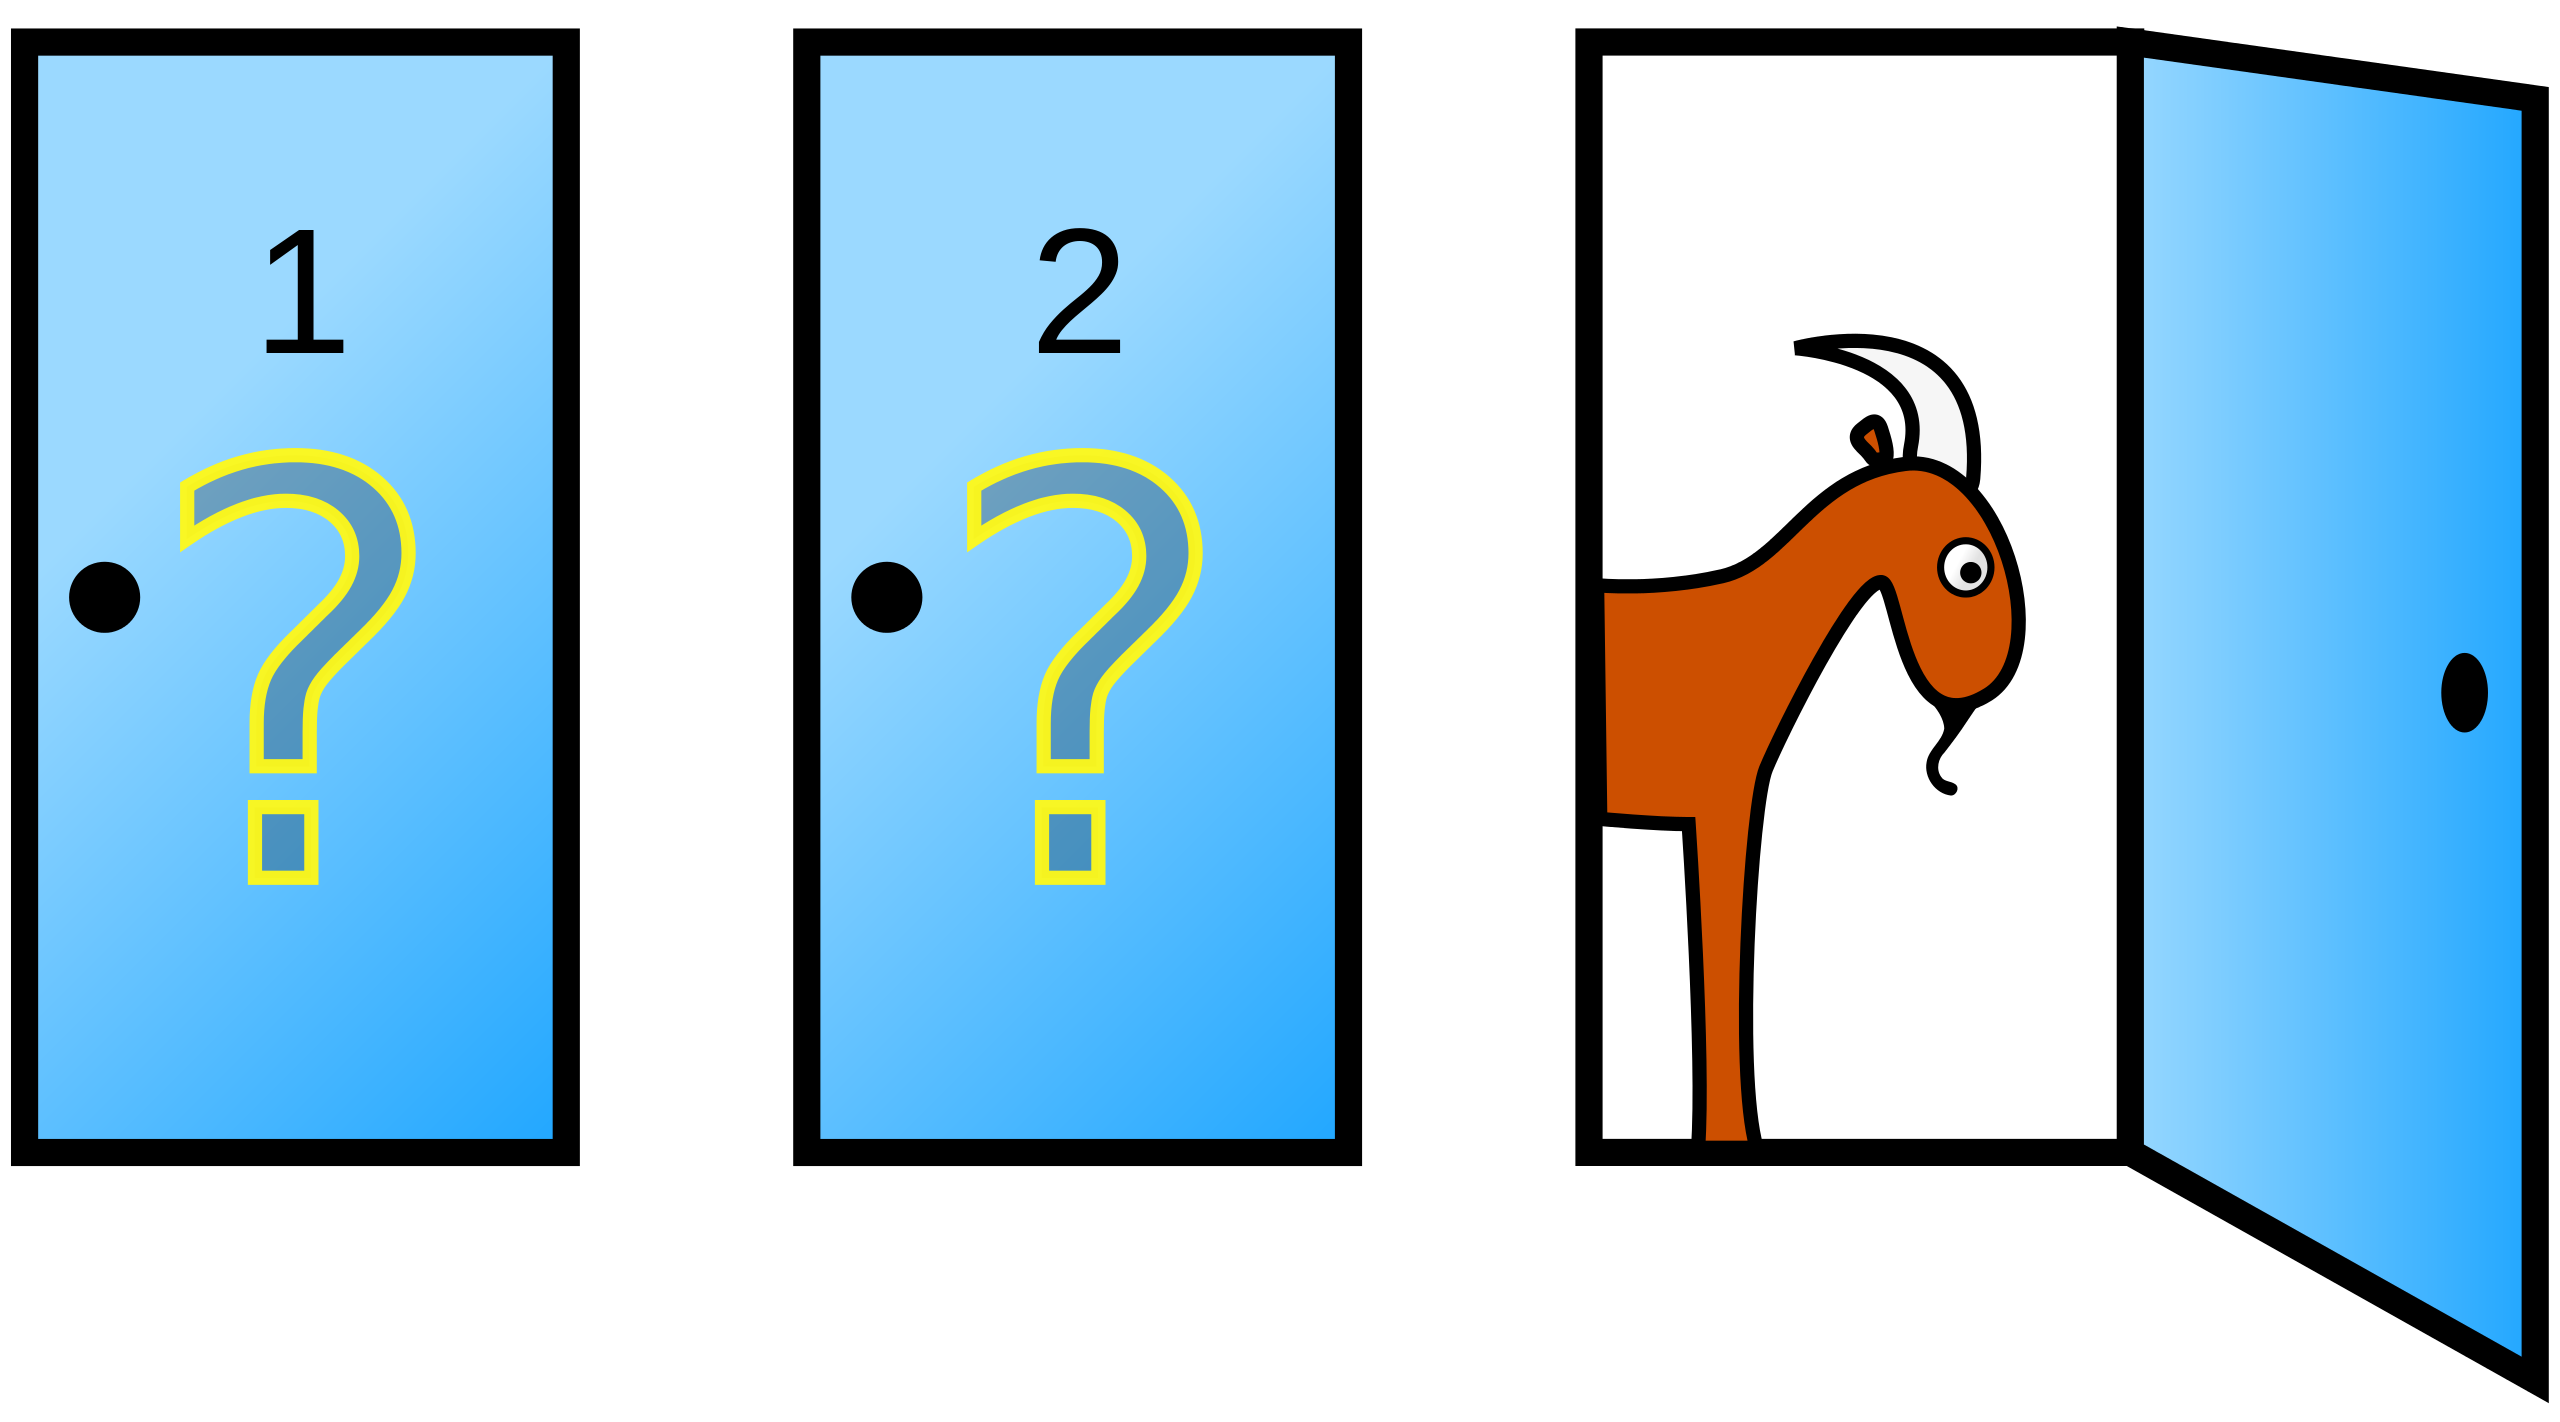 Two closed doors with question marks on them, next to an open door with a goat behind it.